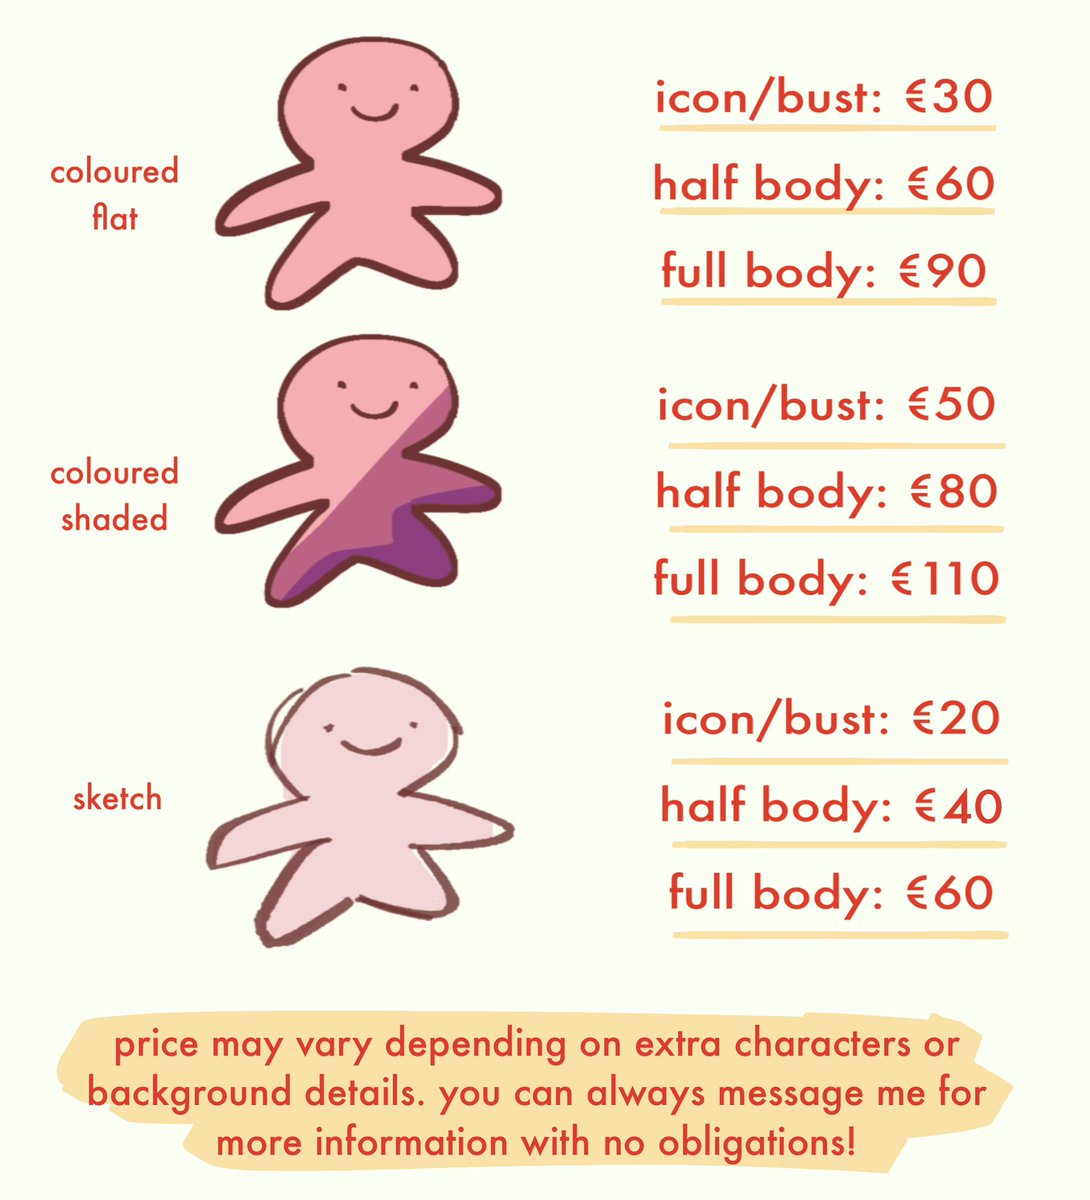 NEW C⭐️MMISSI⭐️N POST

im in dire need of money due to the new academic year so im renewing my c0mmissi0n details. every example below is a past c0mm!

if you are interested and have ANY questions for me, dm me!

or you can submit a google form right away (below) 